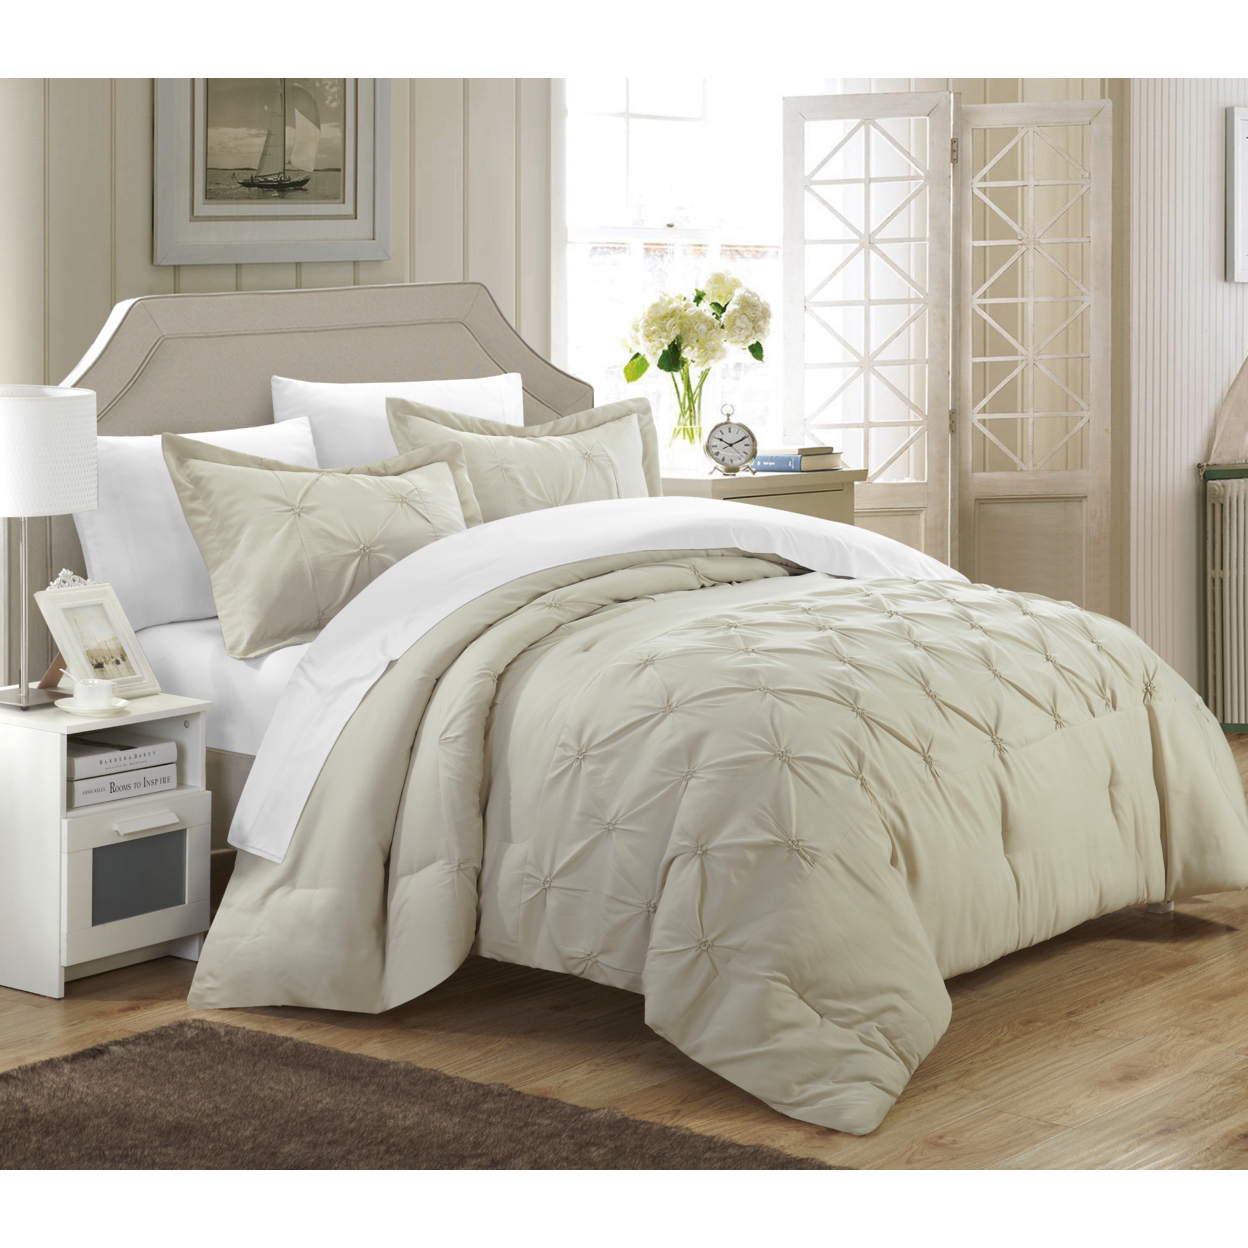 Chic Home 3 Piece Nica Pinch Pleat Pintuck Duvet Cover And Shams Set - Beige, Queen